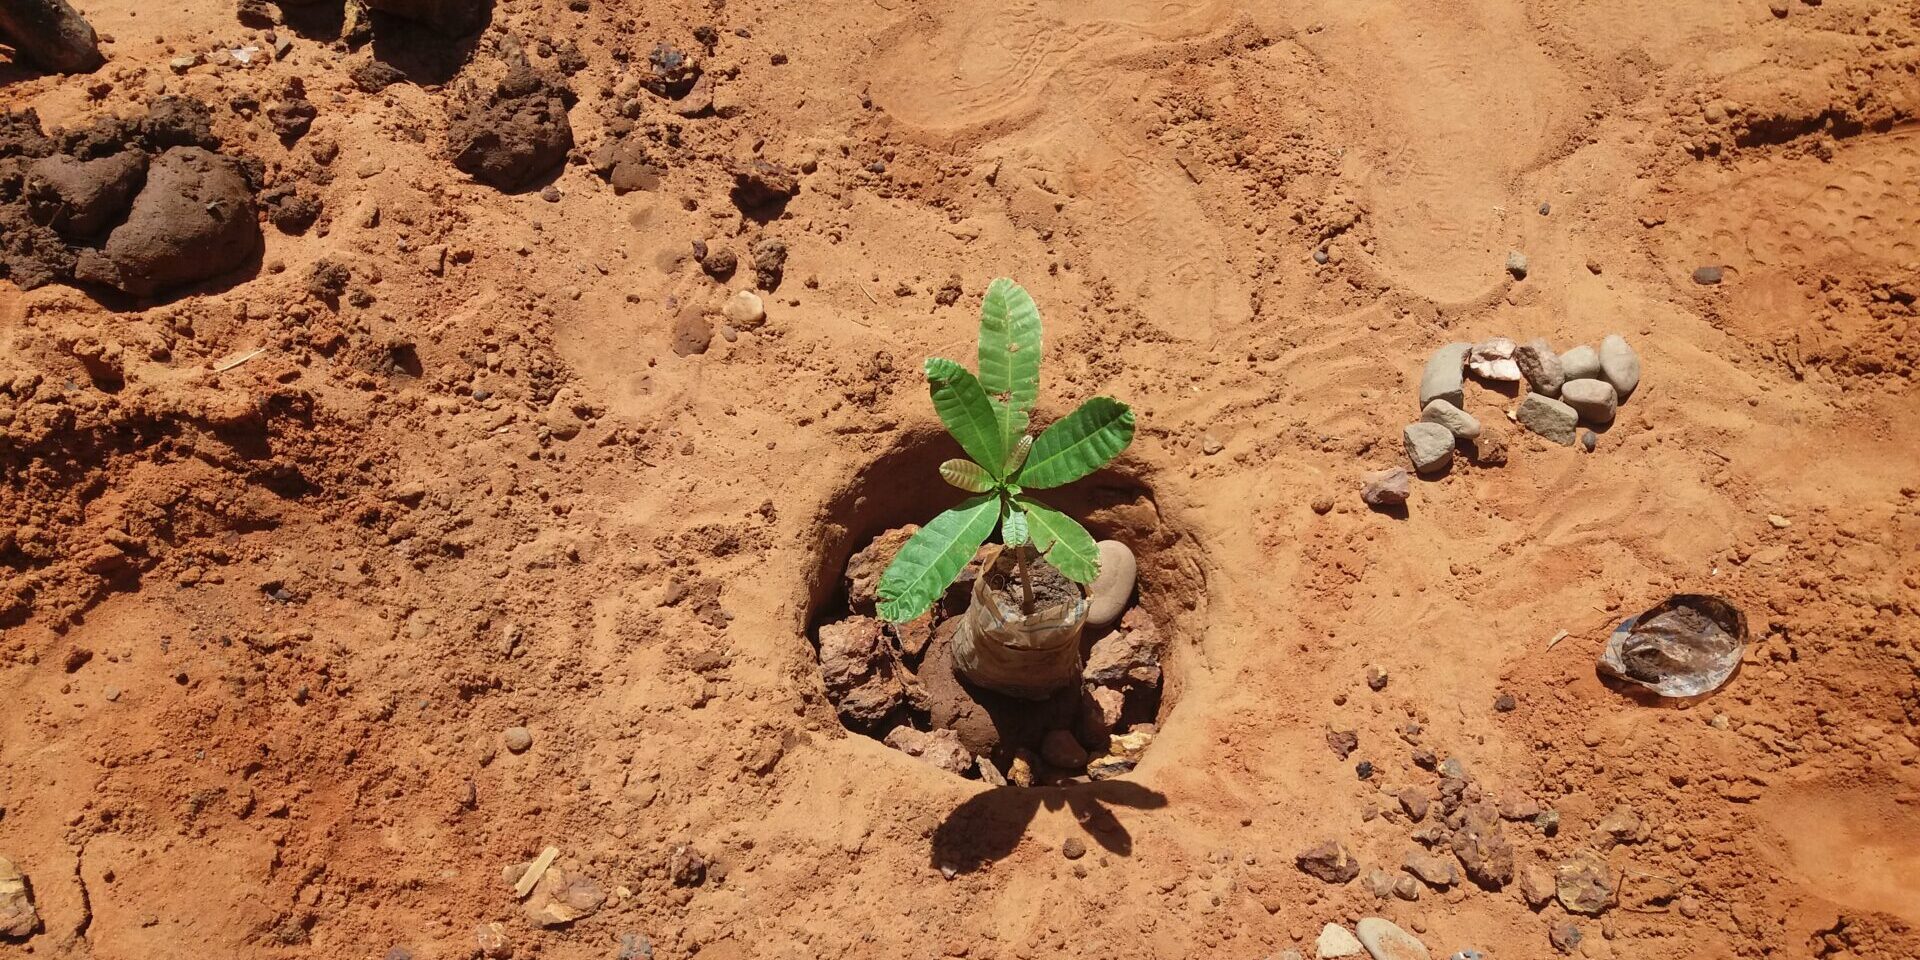 A small green plant sprouts up from dirt.